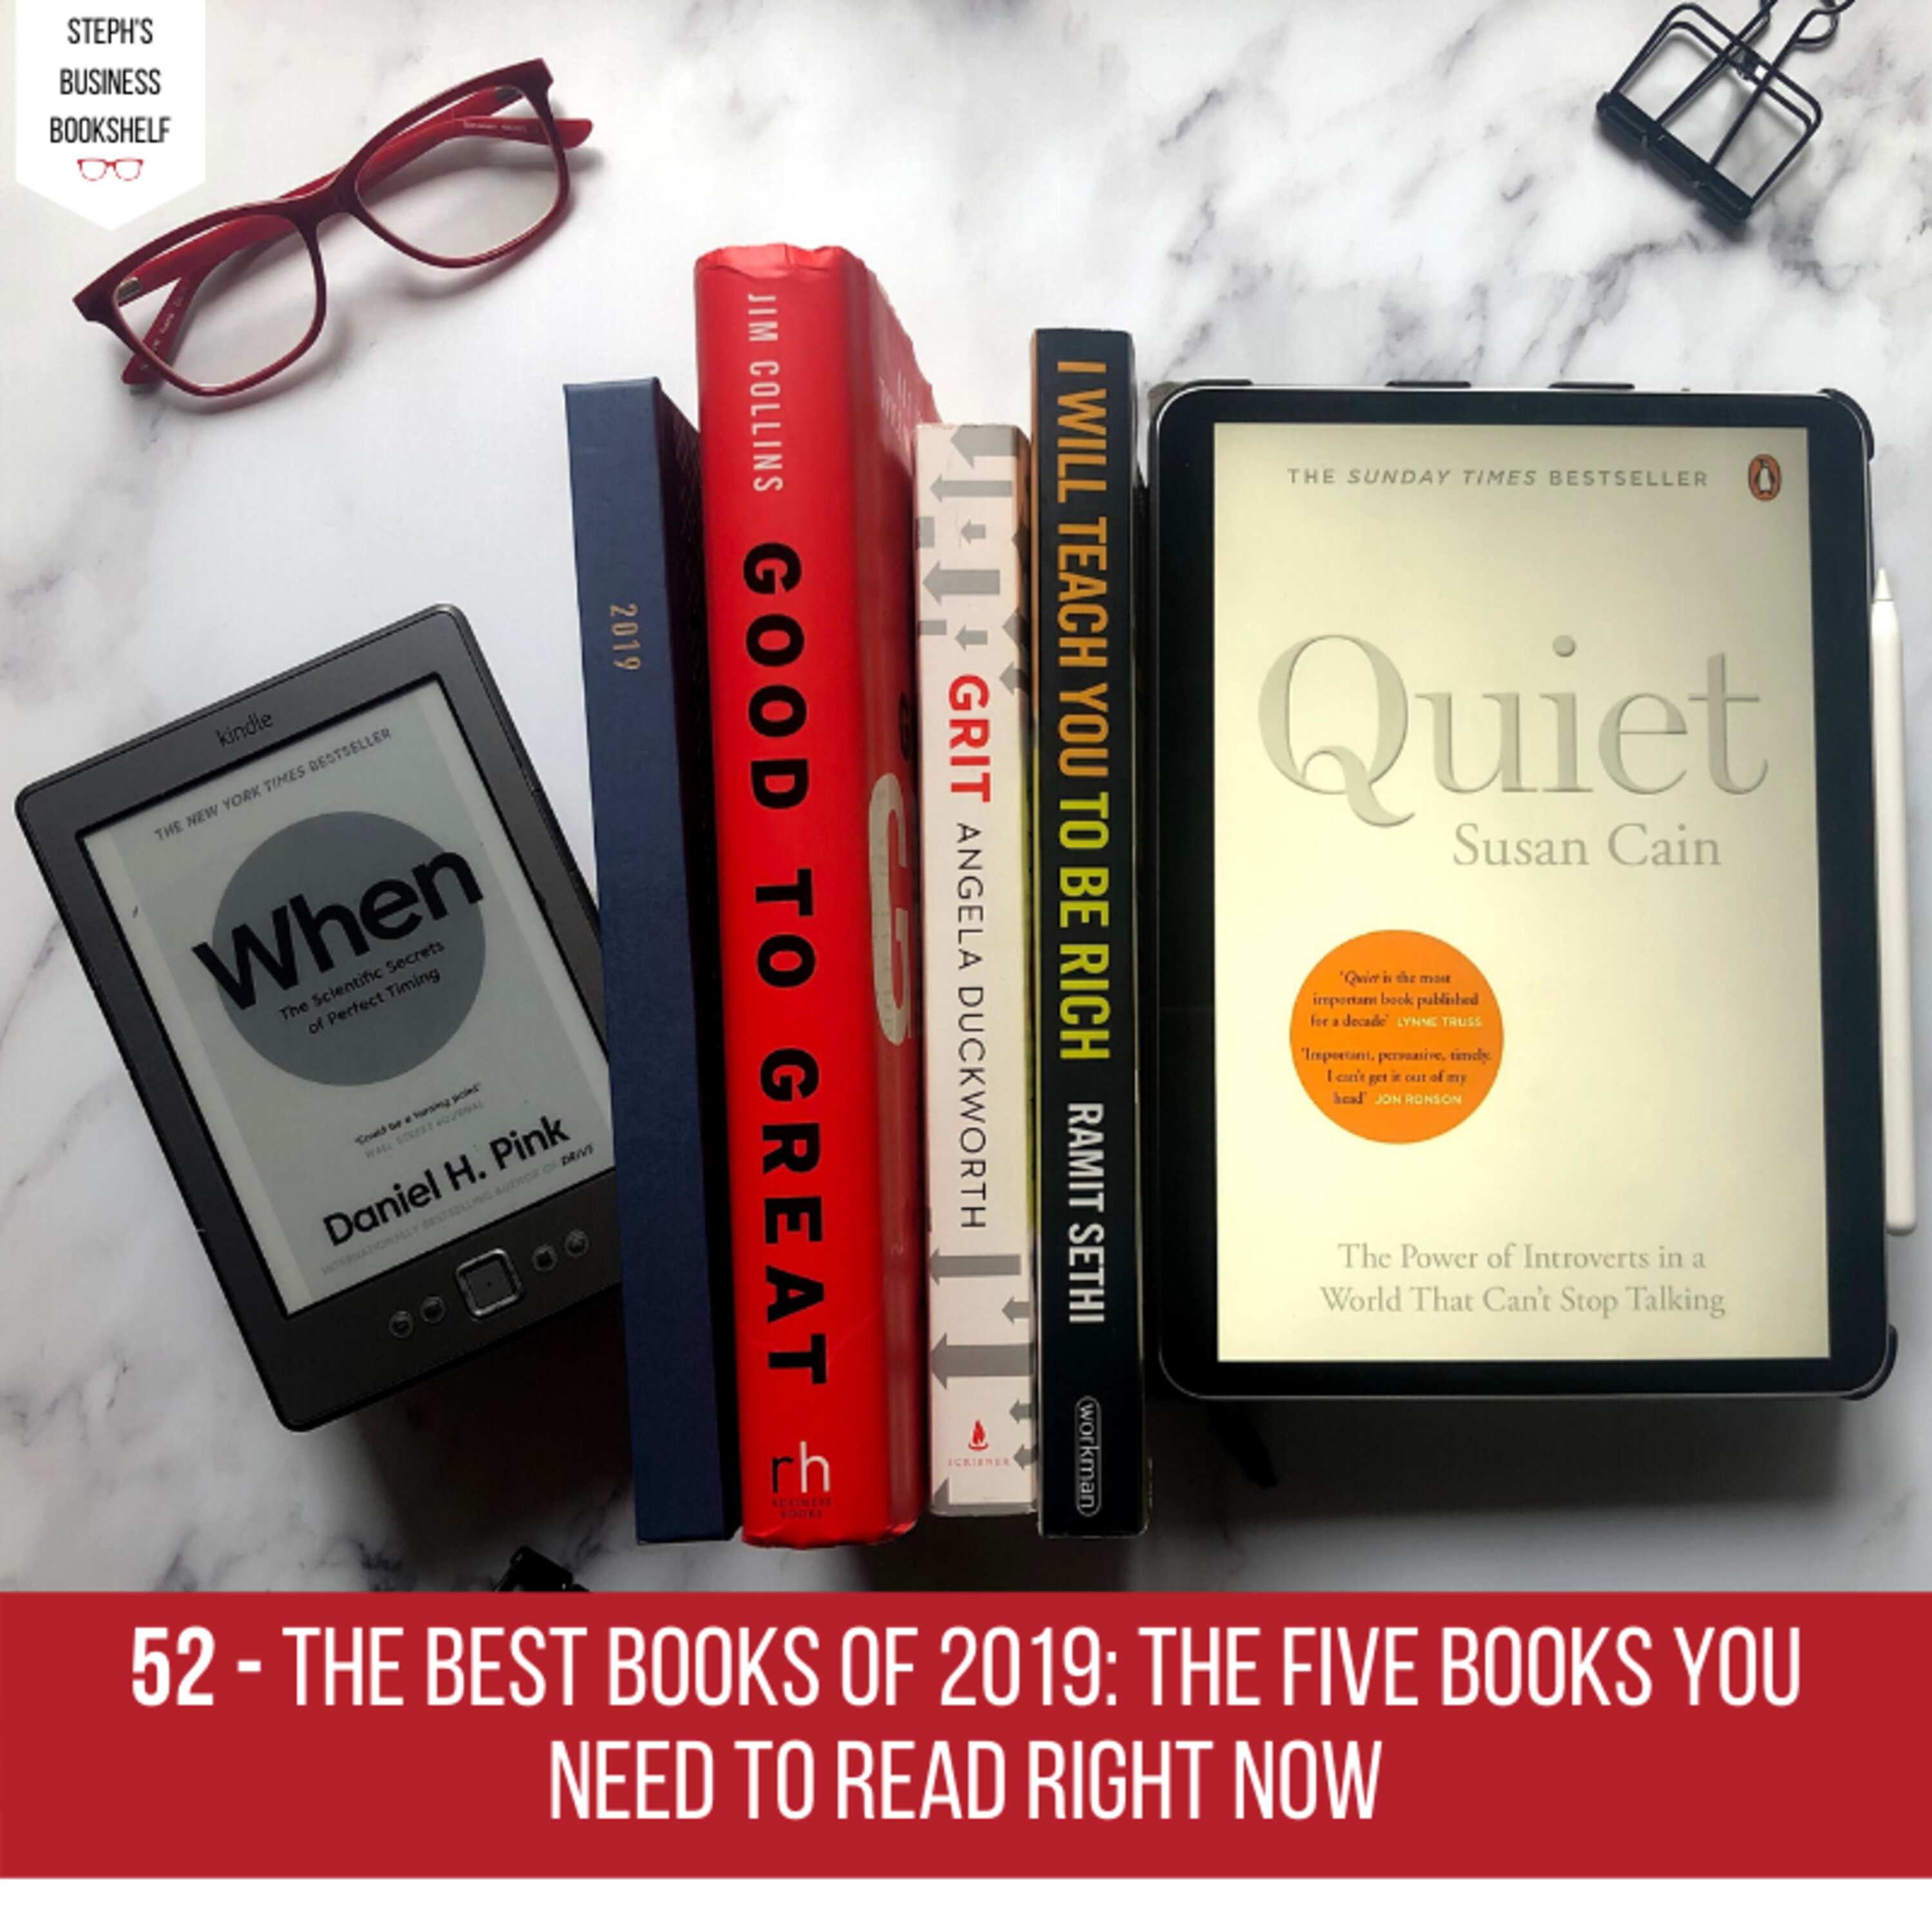 The Best Books of 2019: The five books you need to read right now Image